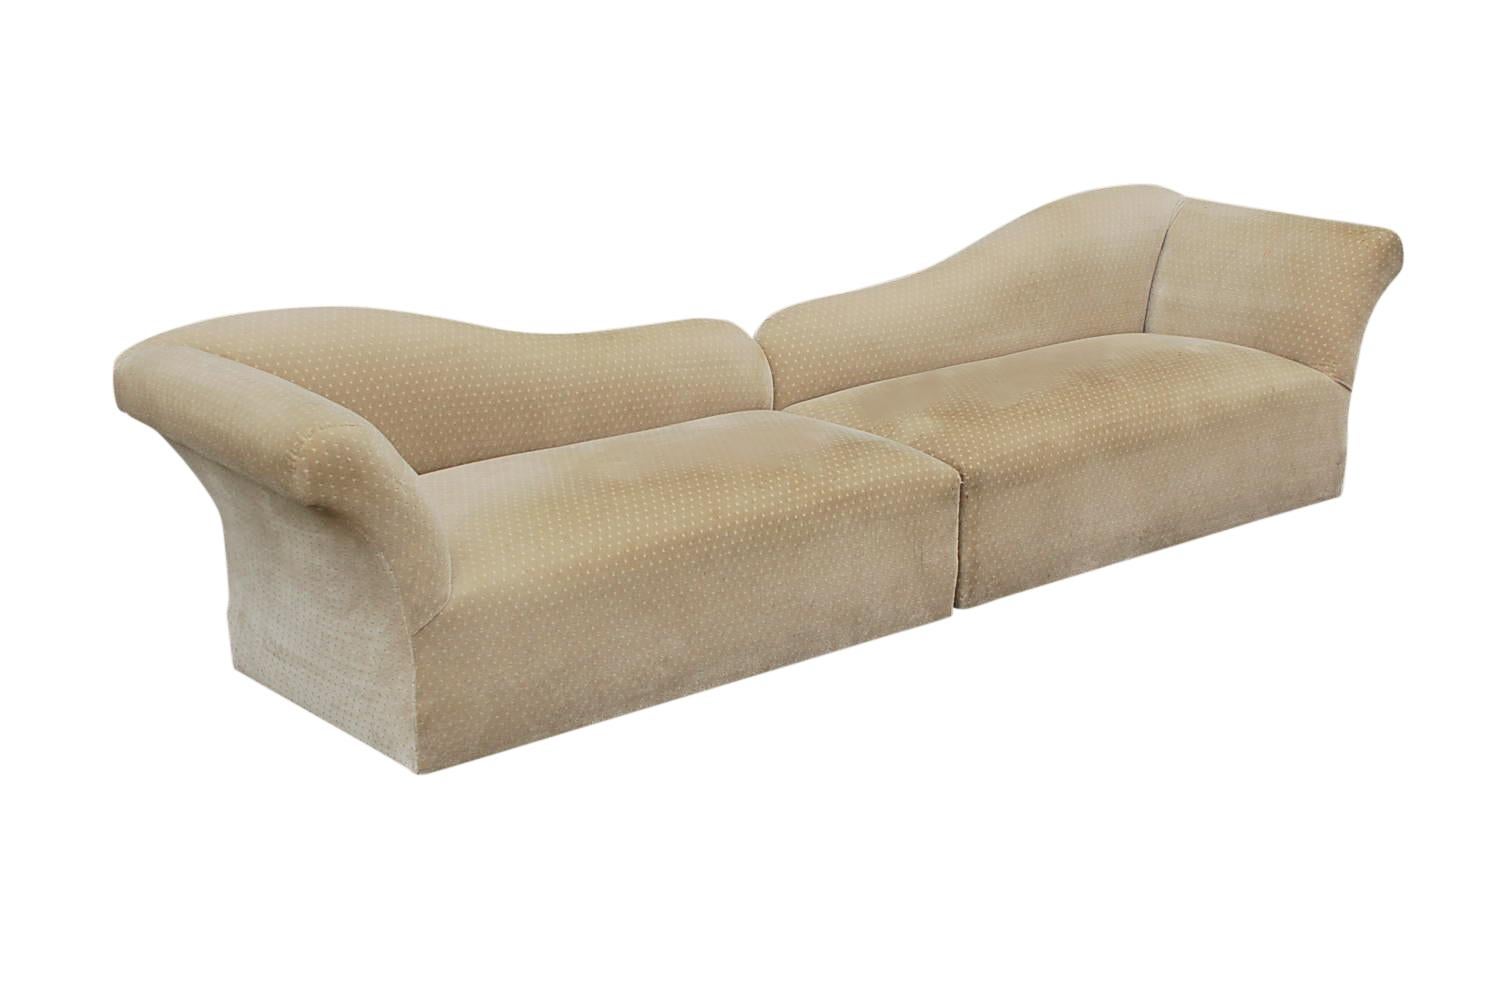 A transitional modern 2 piece long sofa or pair of chaise lounges. These feature their original upholstery from the 1970s which is soiled and needs recovering. Padding and foam are in great condition.